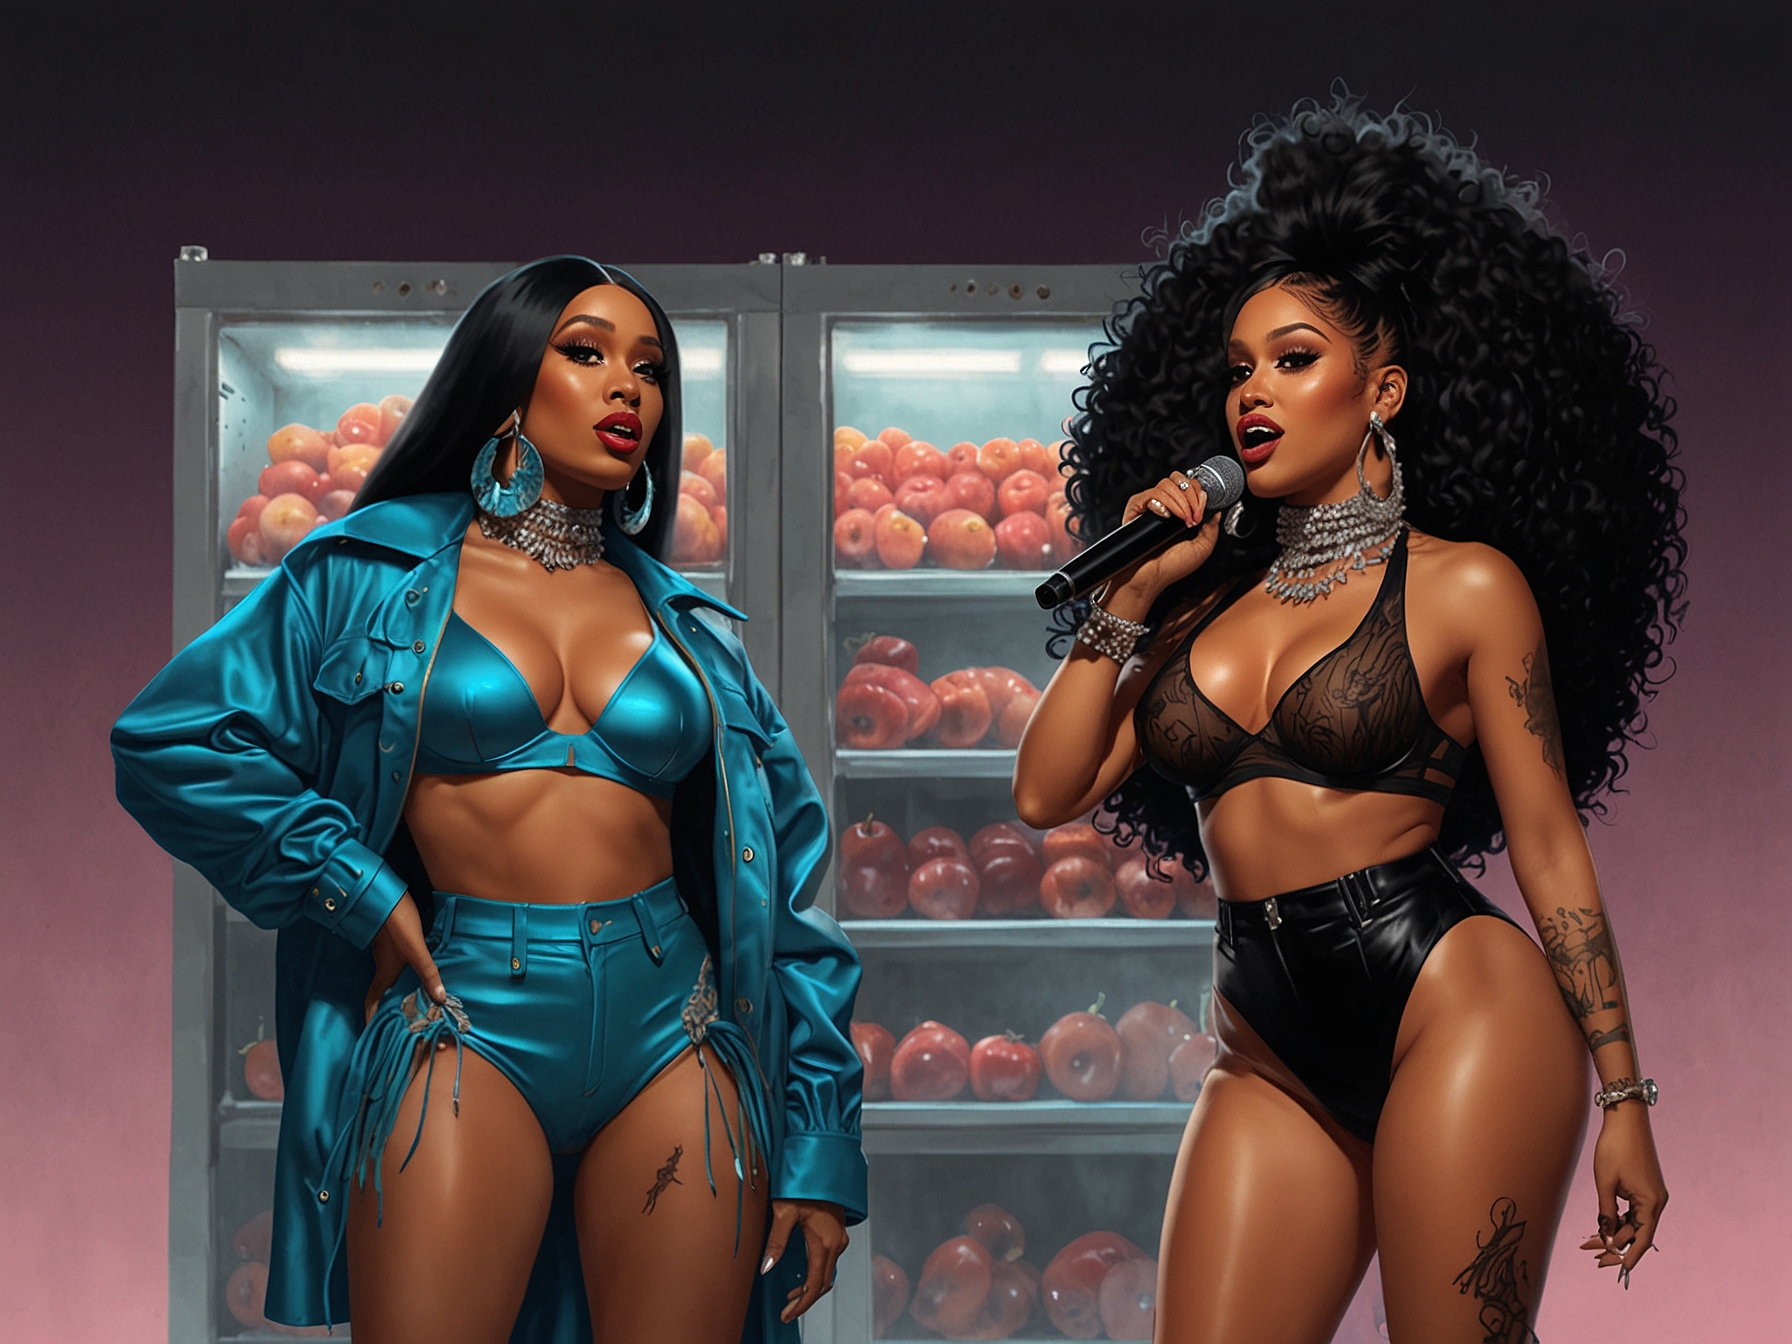 Peso Pluma and Cardi B perform together on stage, captivating the audience with their dynamic collaboration 'Put Em in the Fridge,' merging English and Spanish lyrics seamlessly.